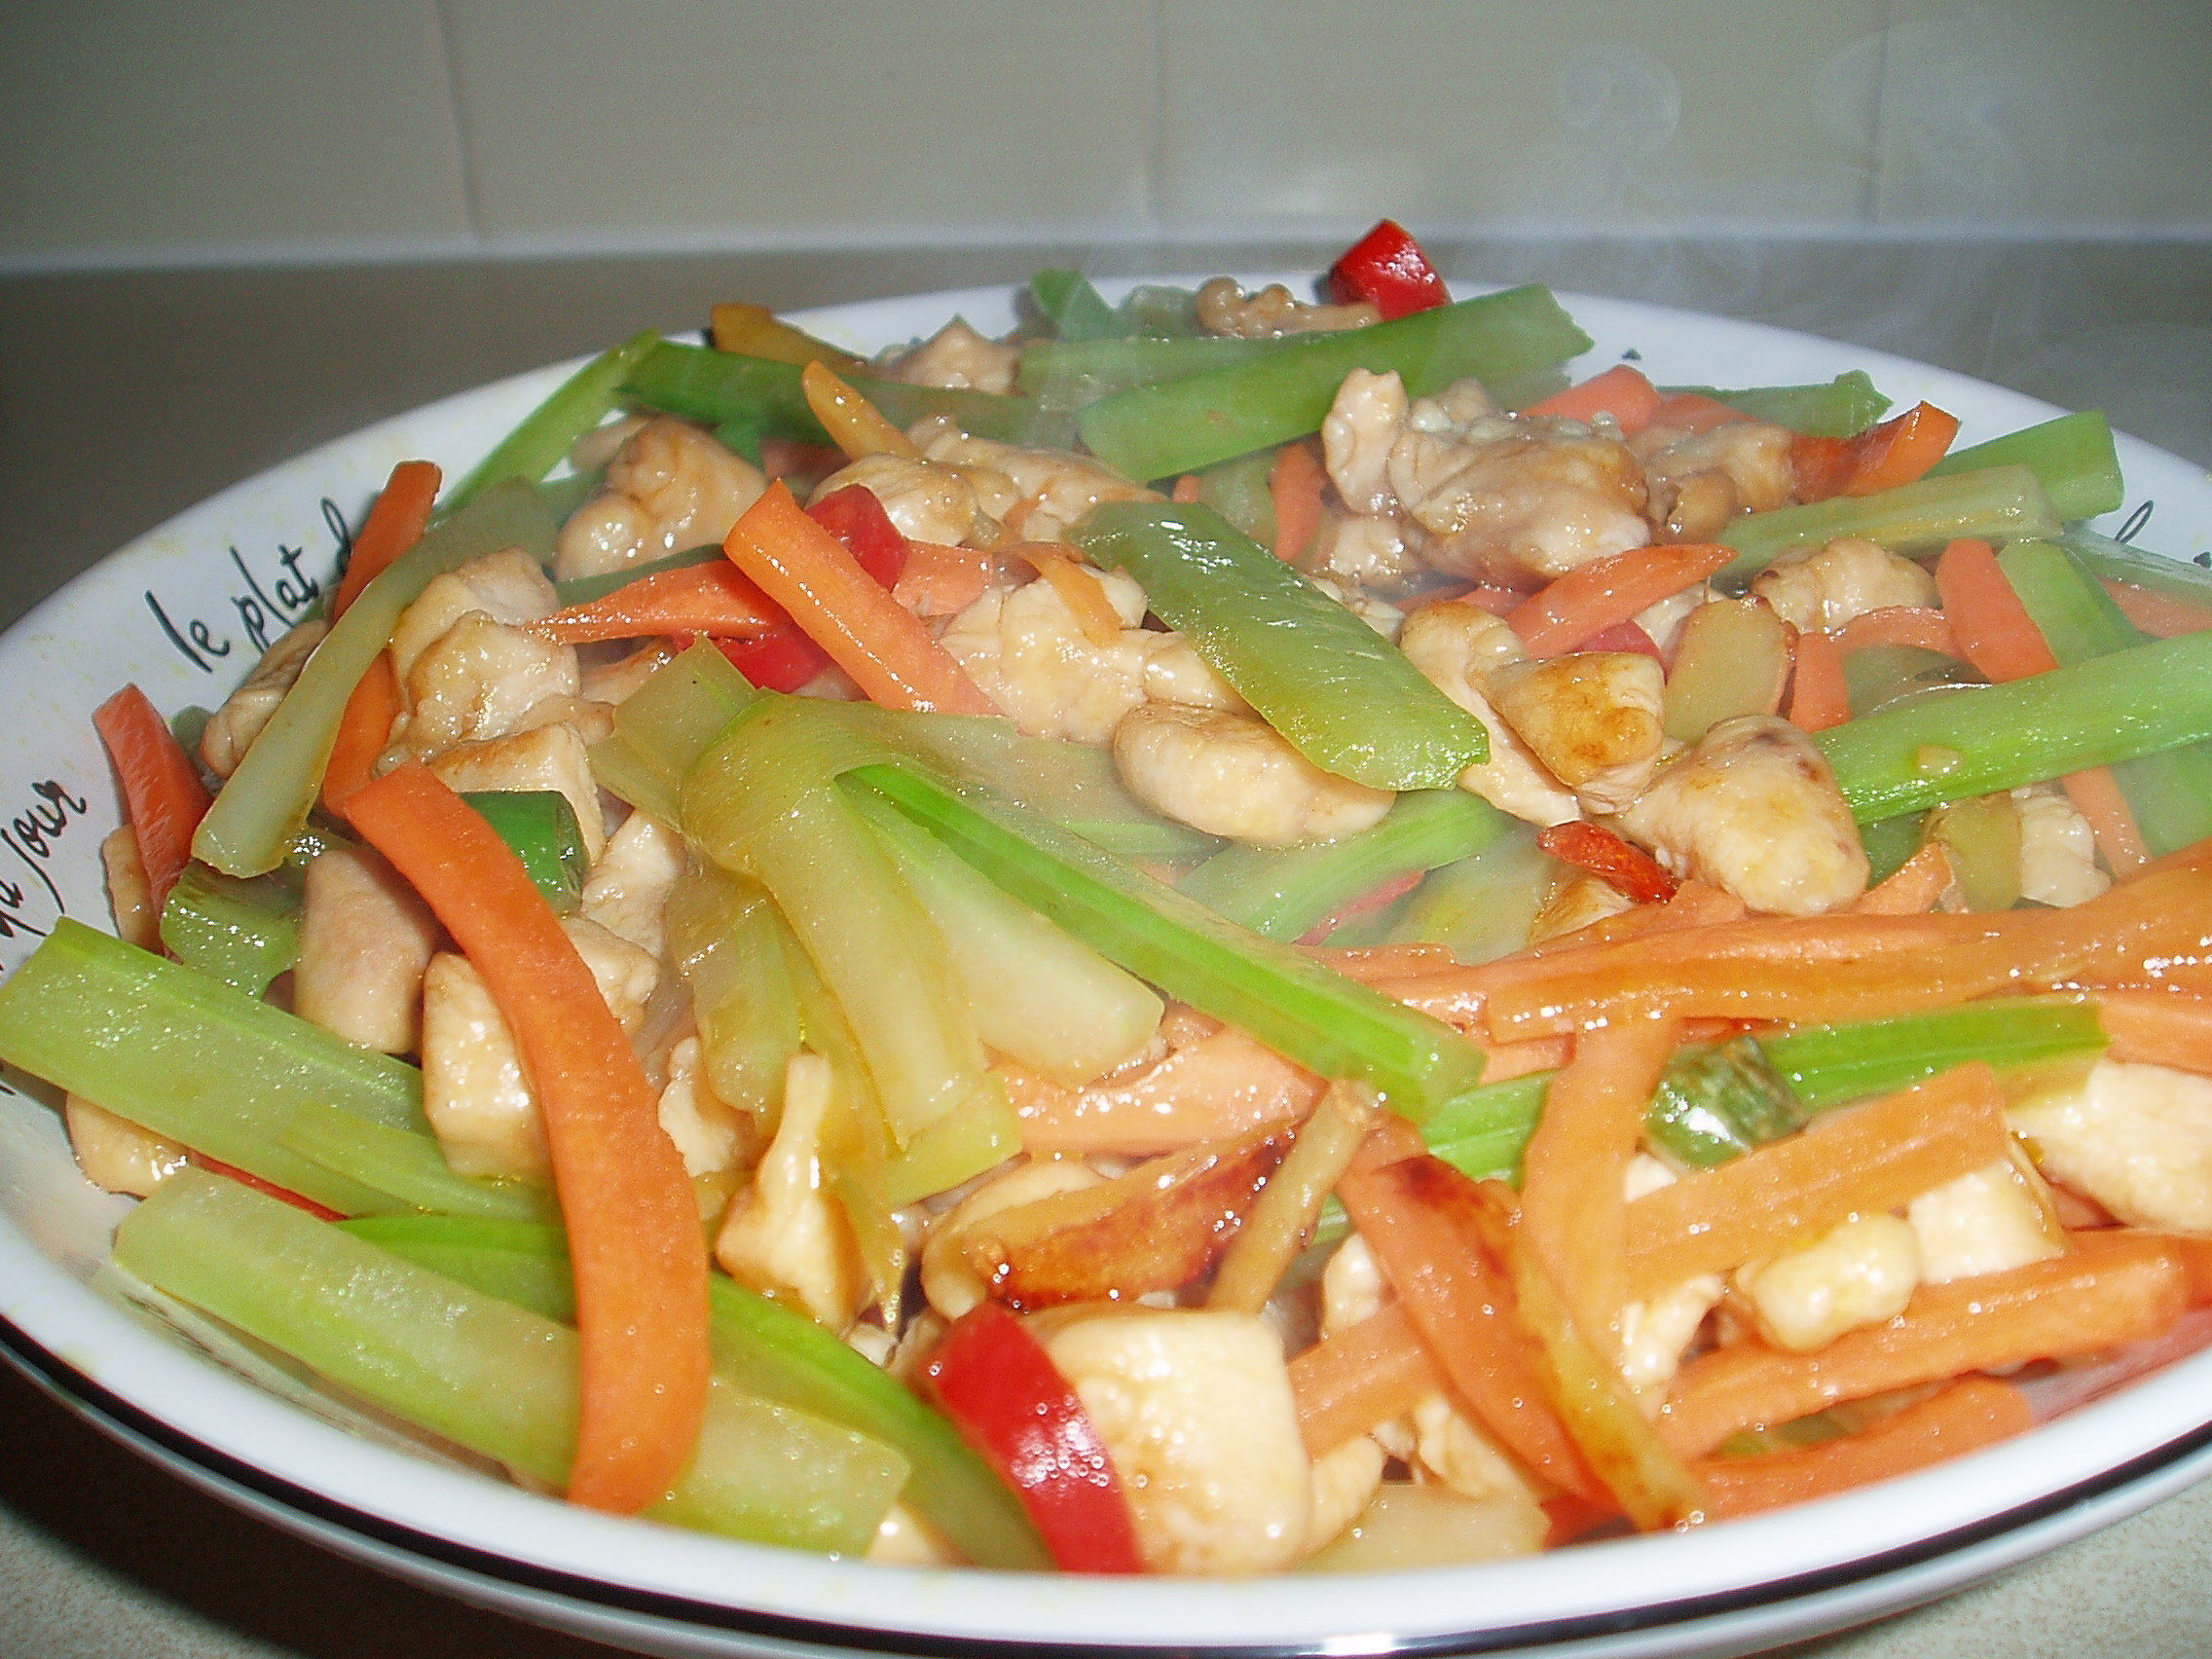 Stir Fry Chicken Breasts
 Spicy Chinese stir fry chicken breast recipe All recipes UK